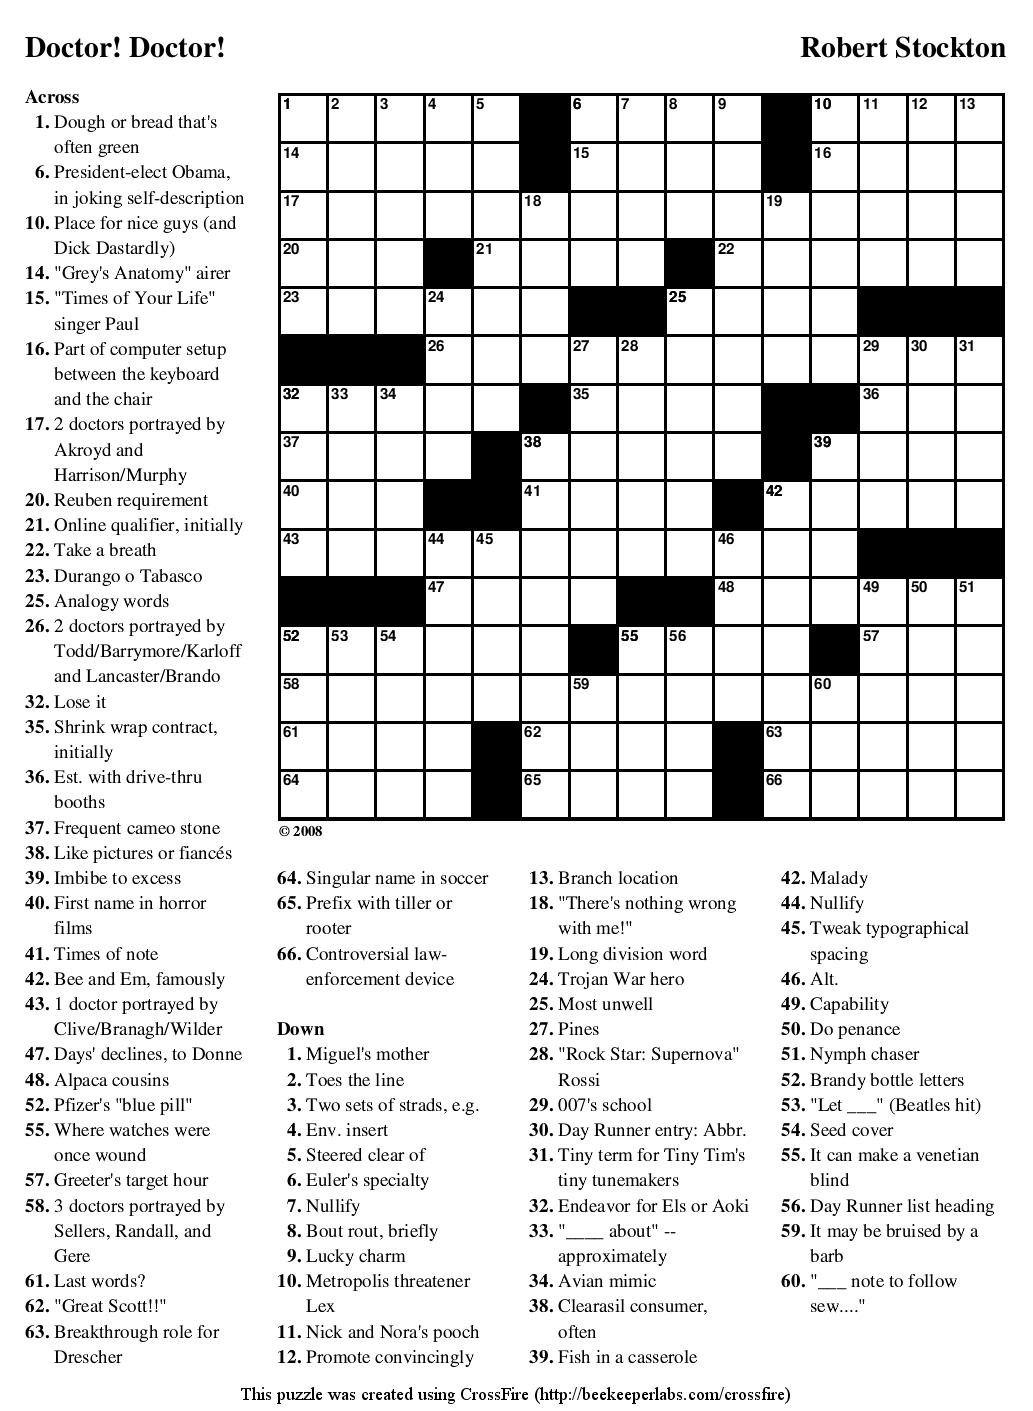 Crossword Puzzles Printable - Yahoo Image Search Results | Crossword - Printable Crossword #1